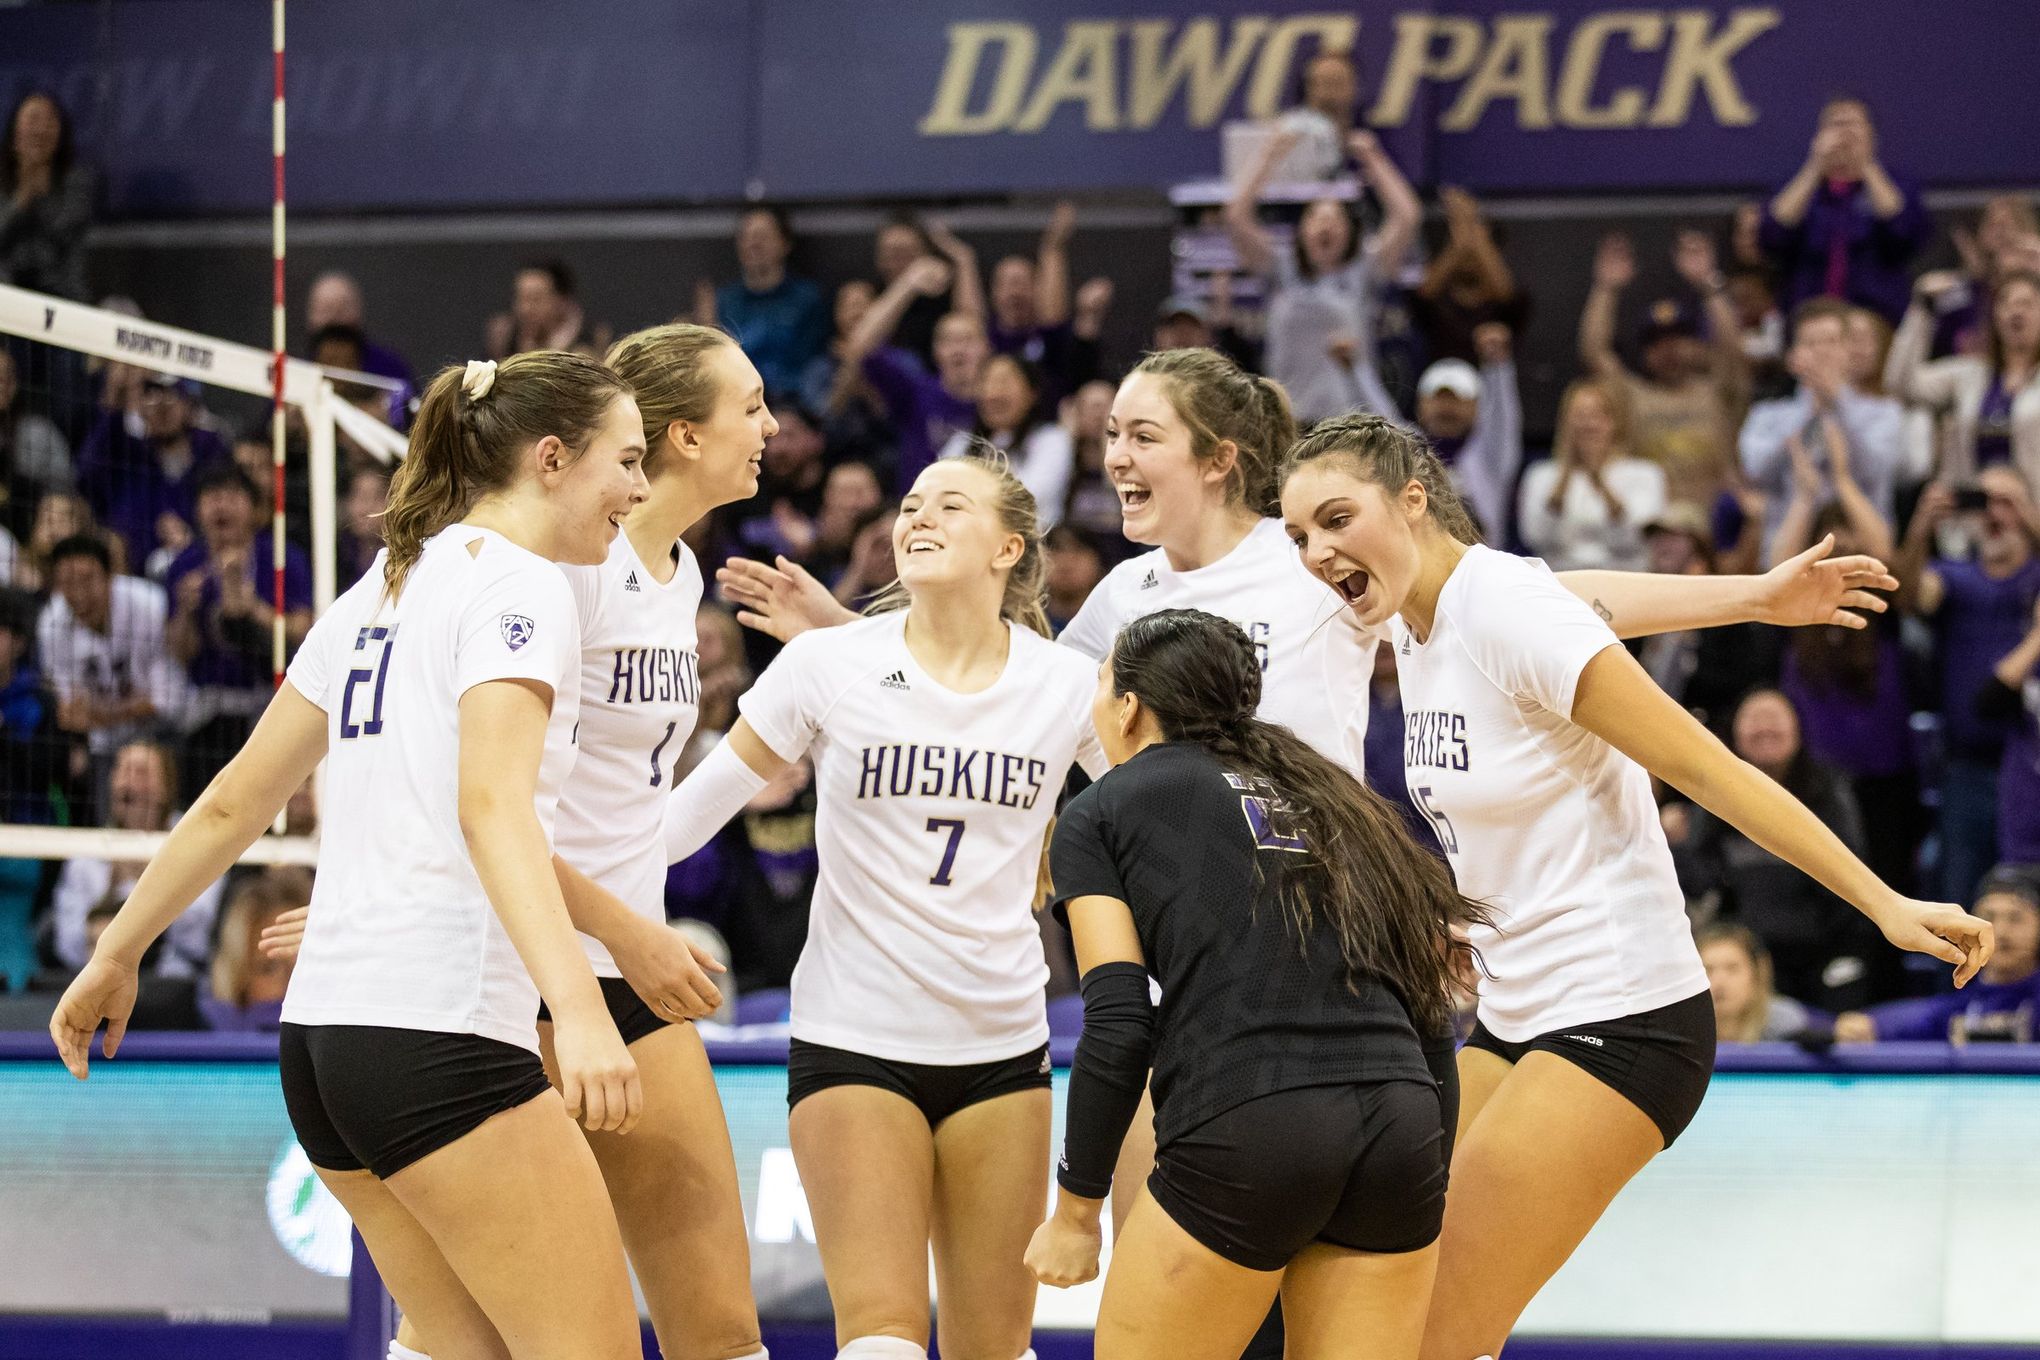 UW Huskies volleyball squad has nationalchampionship capability and you can thank this